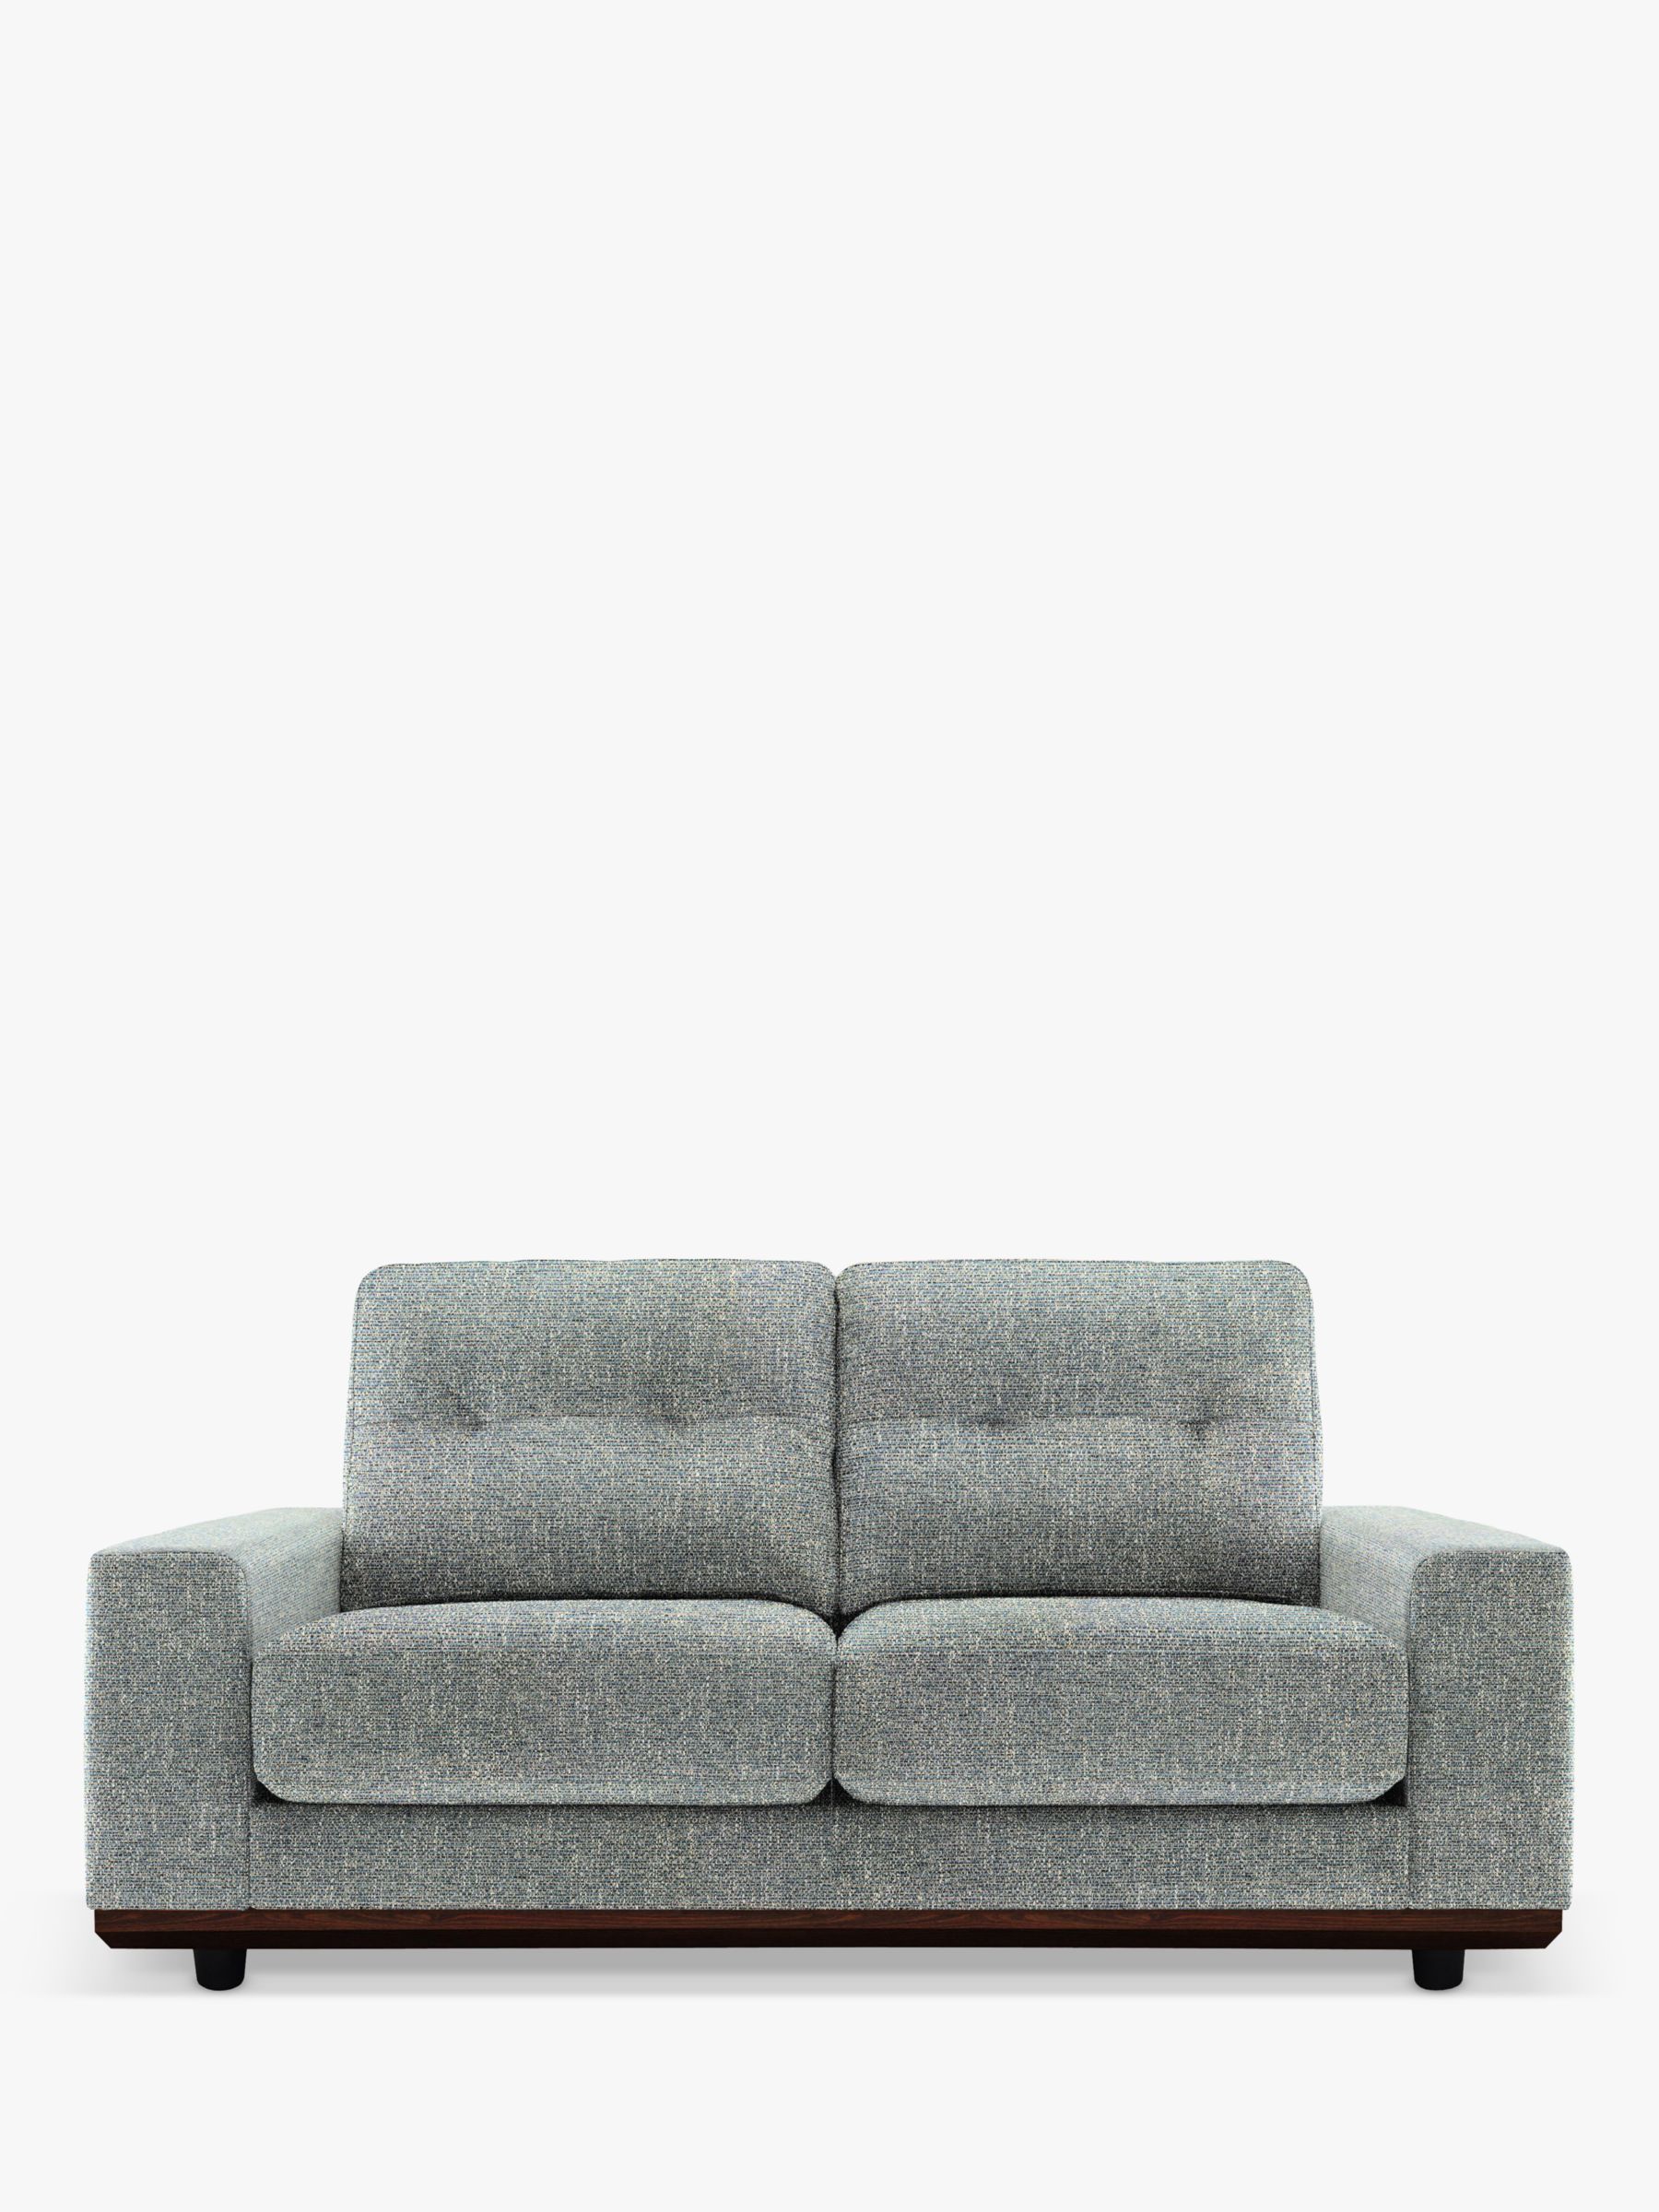 G Plan Vintage The Seventy One Small 2 Seater Sofa